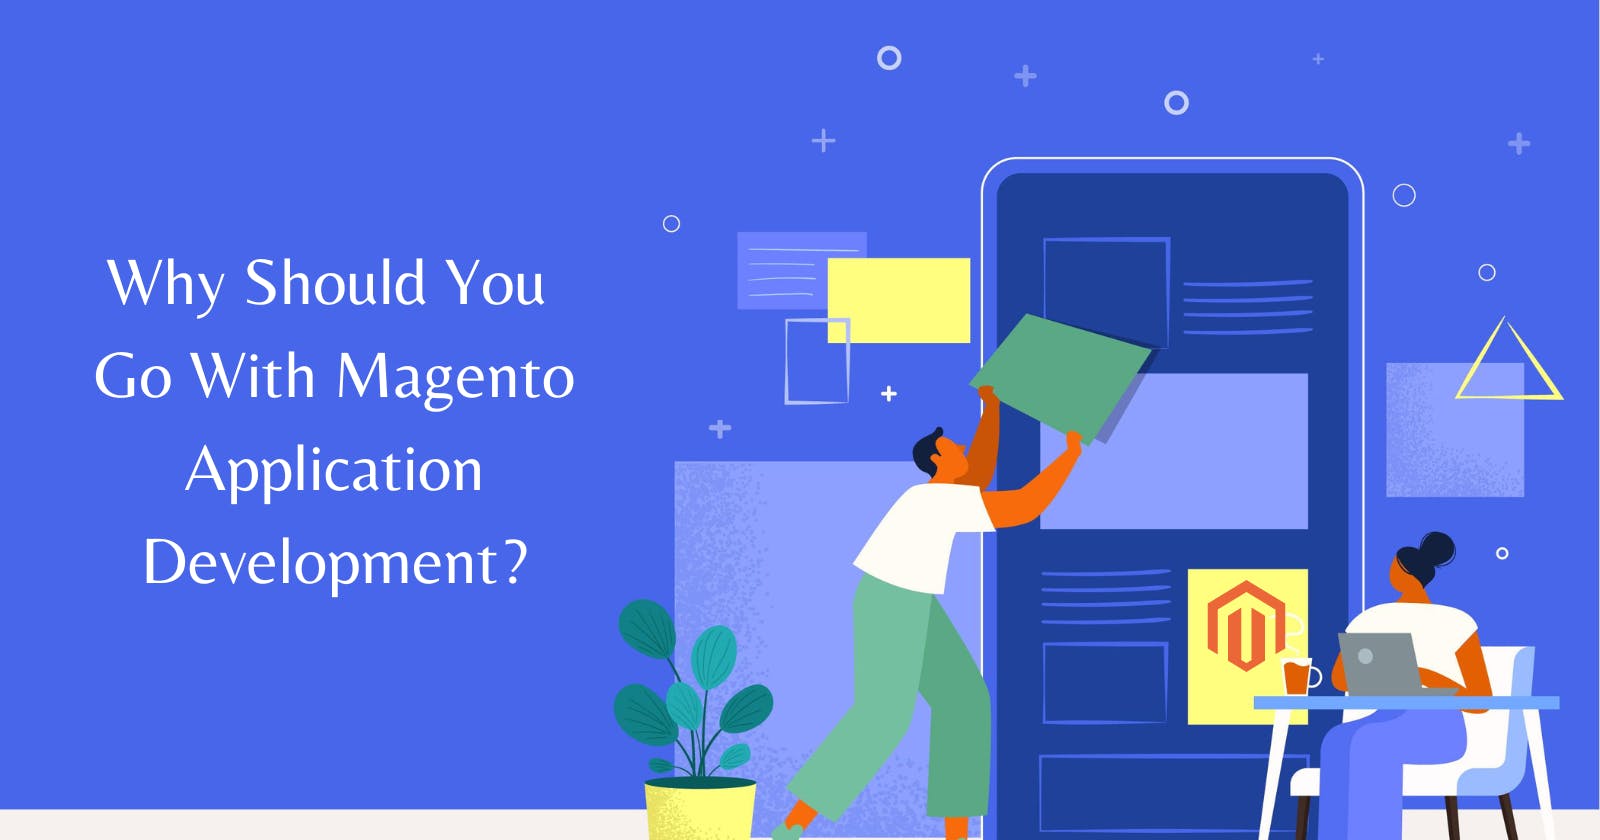 Why Should You Go With Magento Application Development?